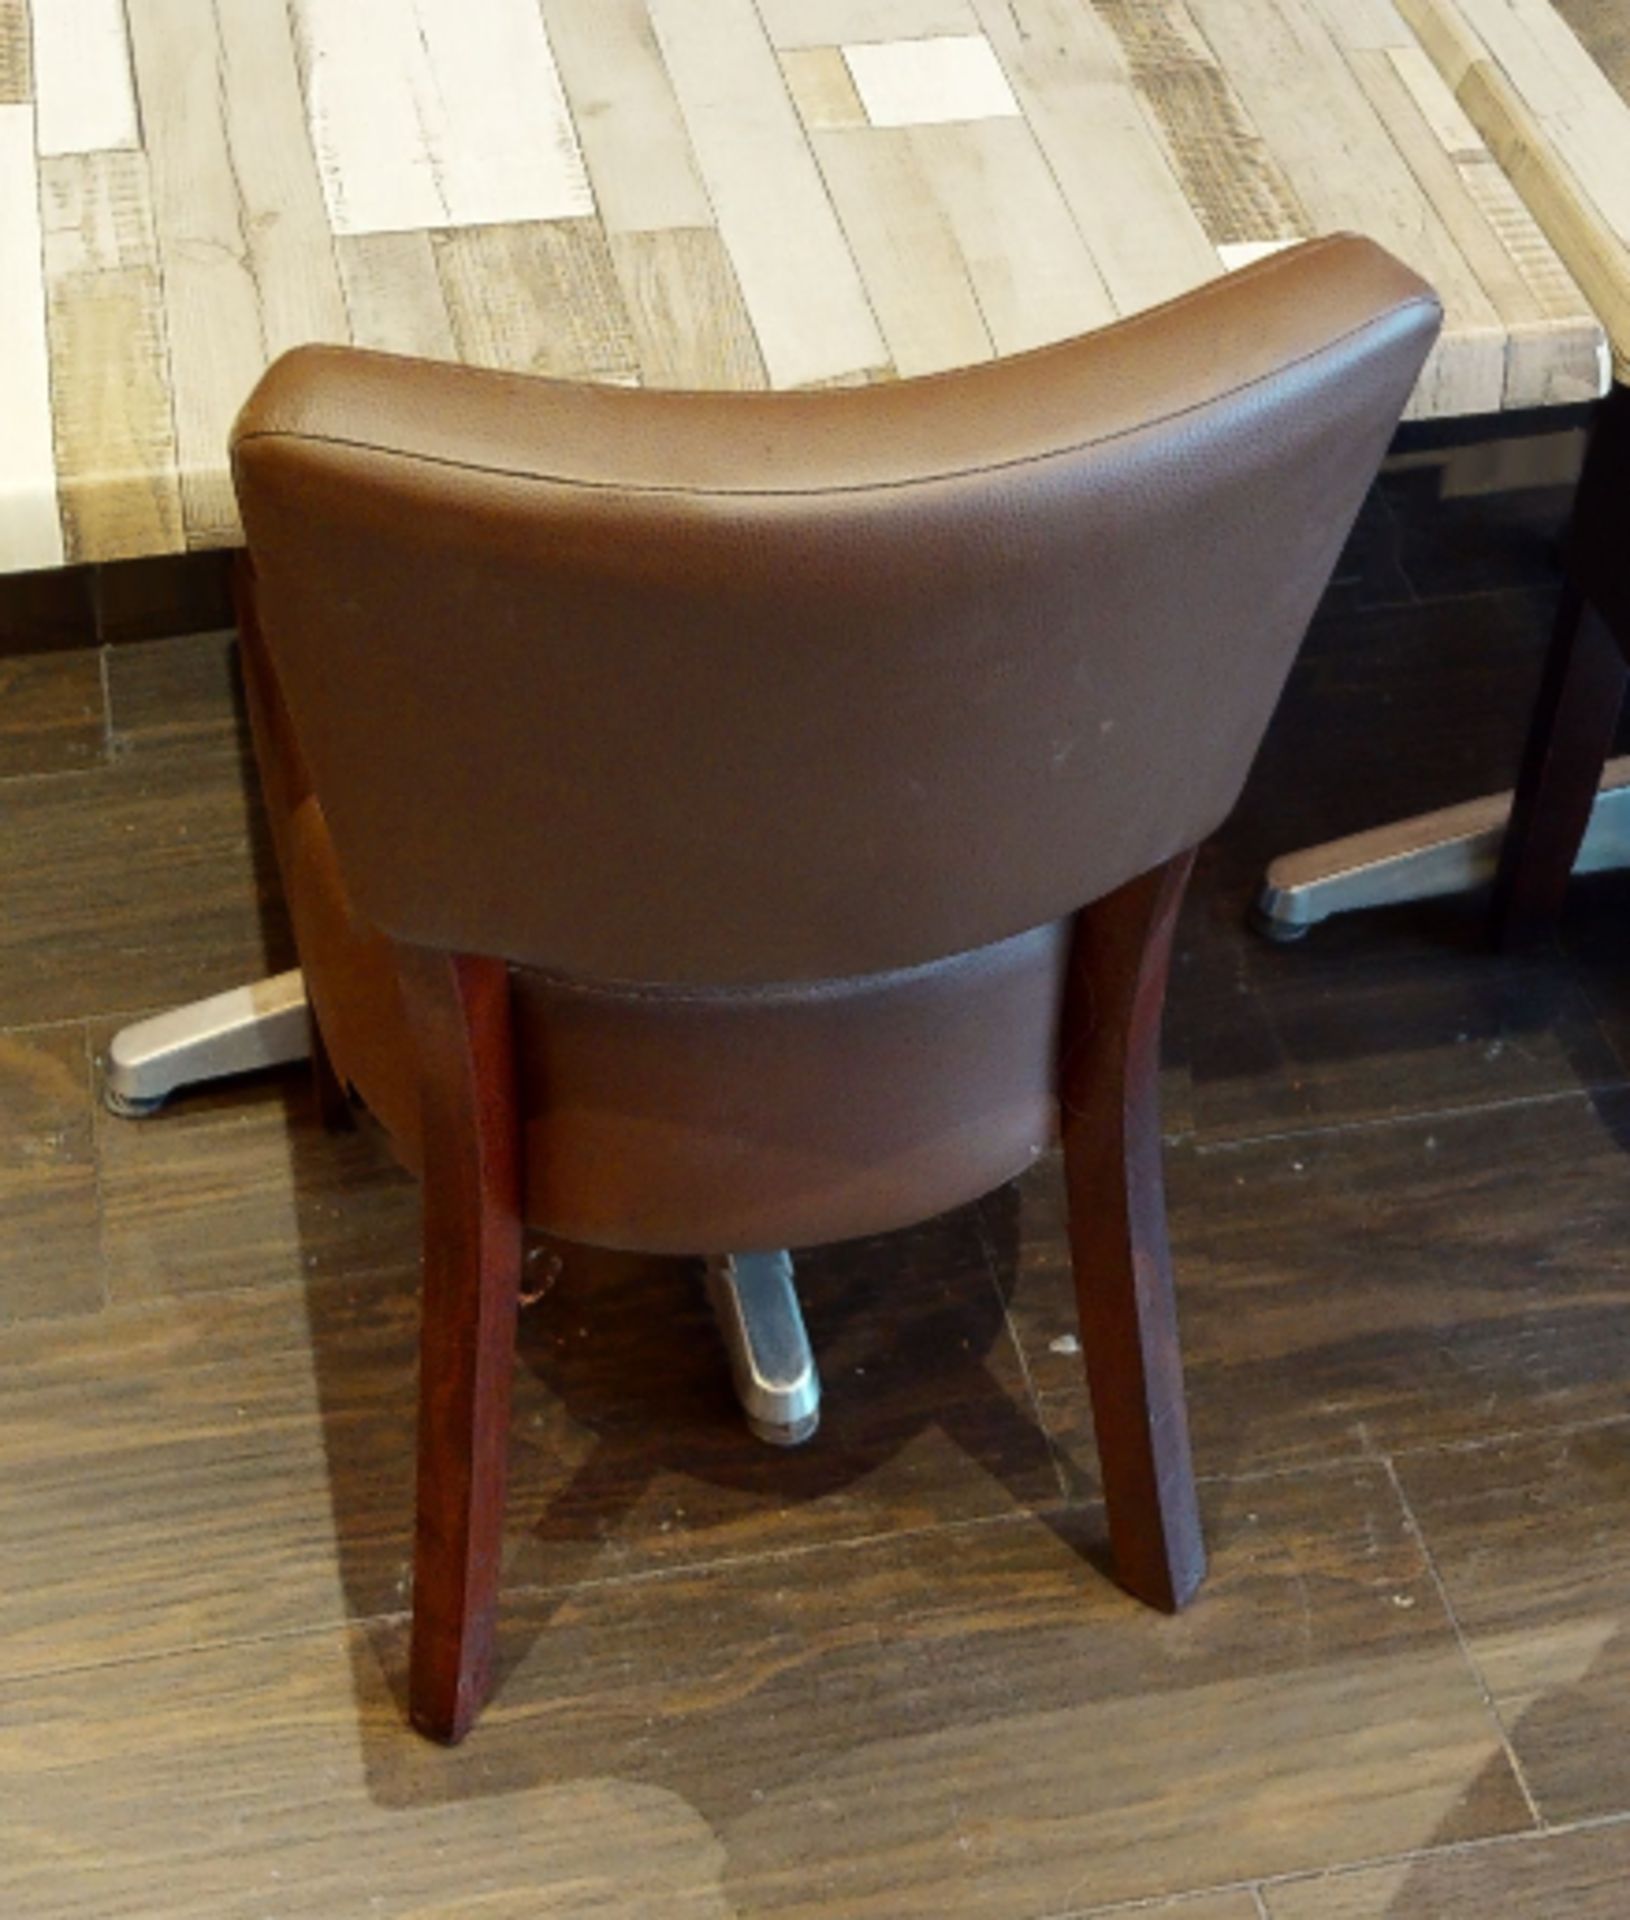 4 x Restaurant Chairs With Brown Leather Seat Pads and Padded Backrests - CL701 - Location: Ashton - Image 4 of 9